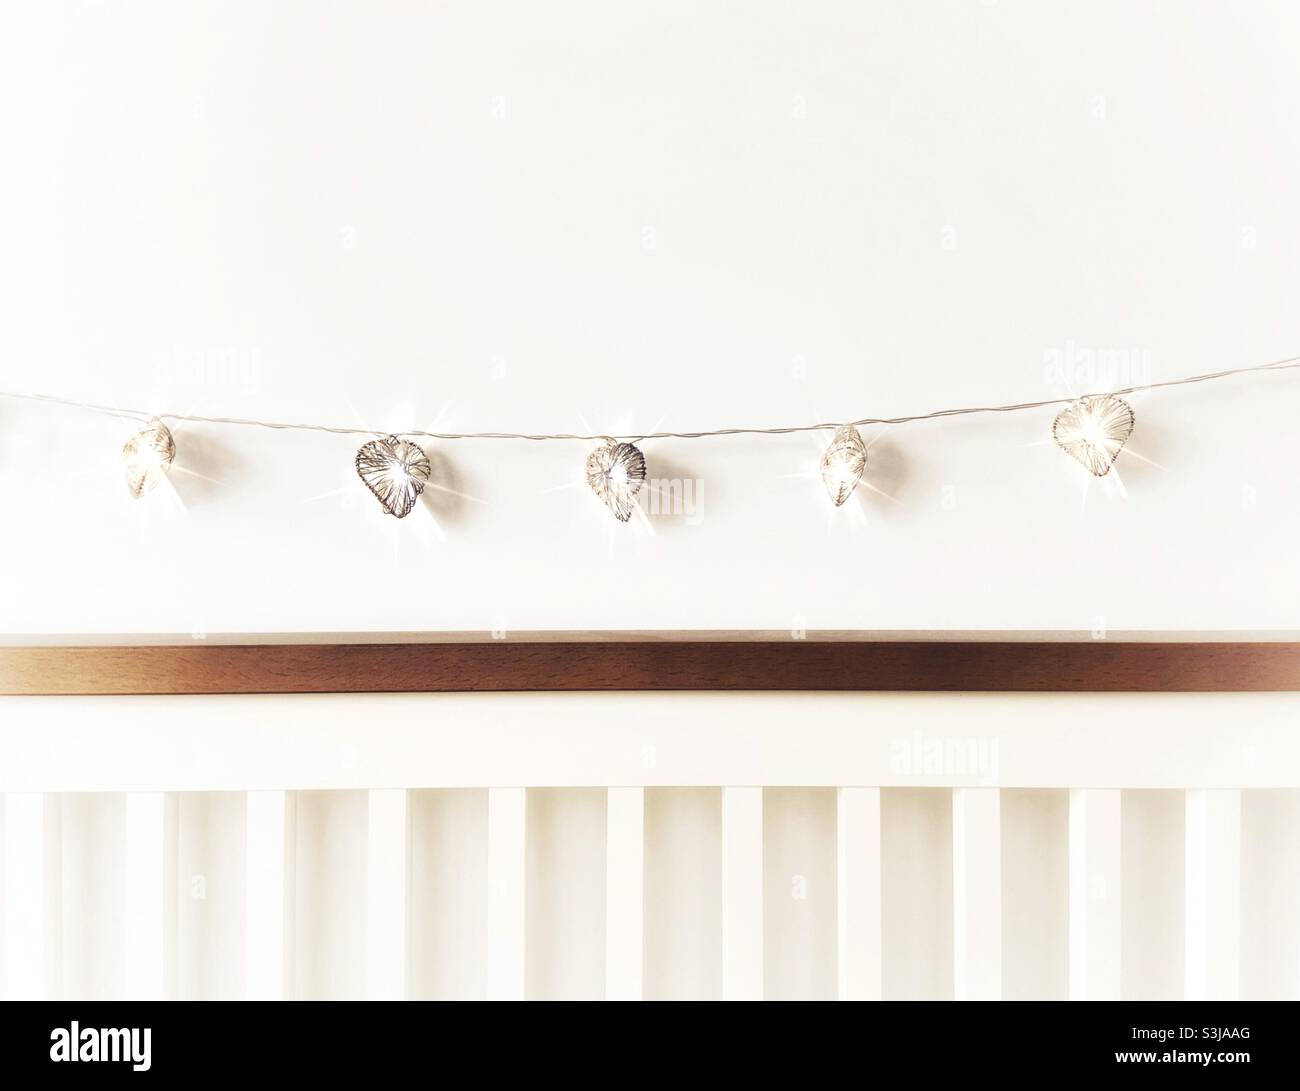 Heart shaped fairy lights strung above bed headboard Stock Photo